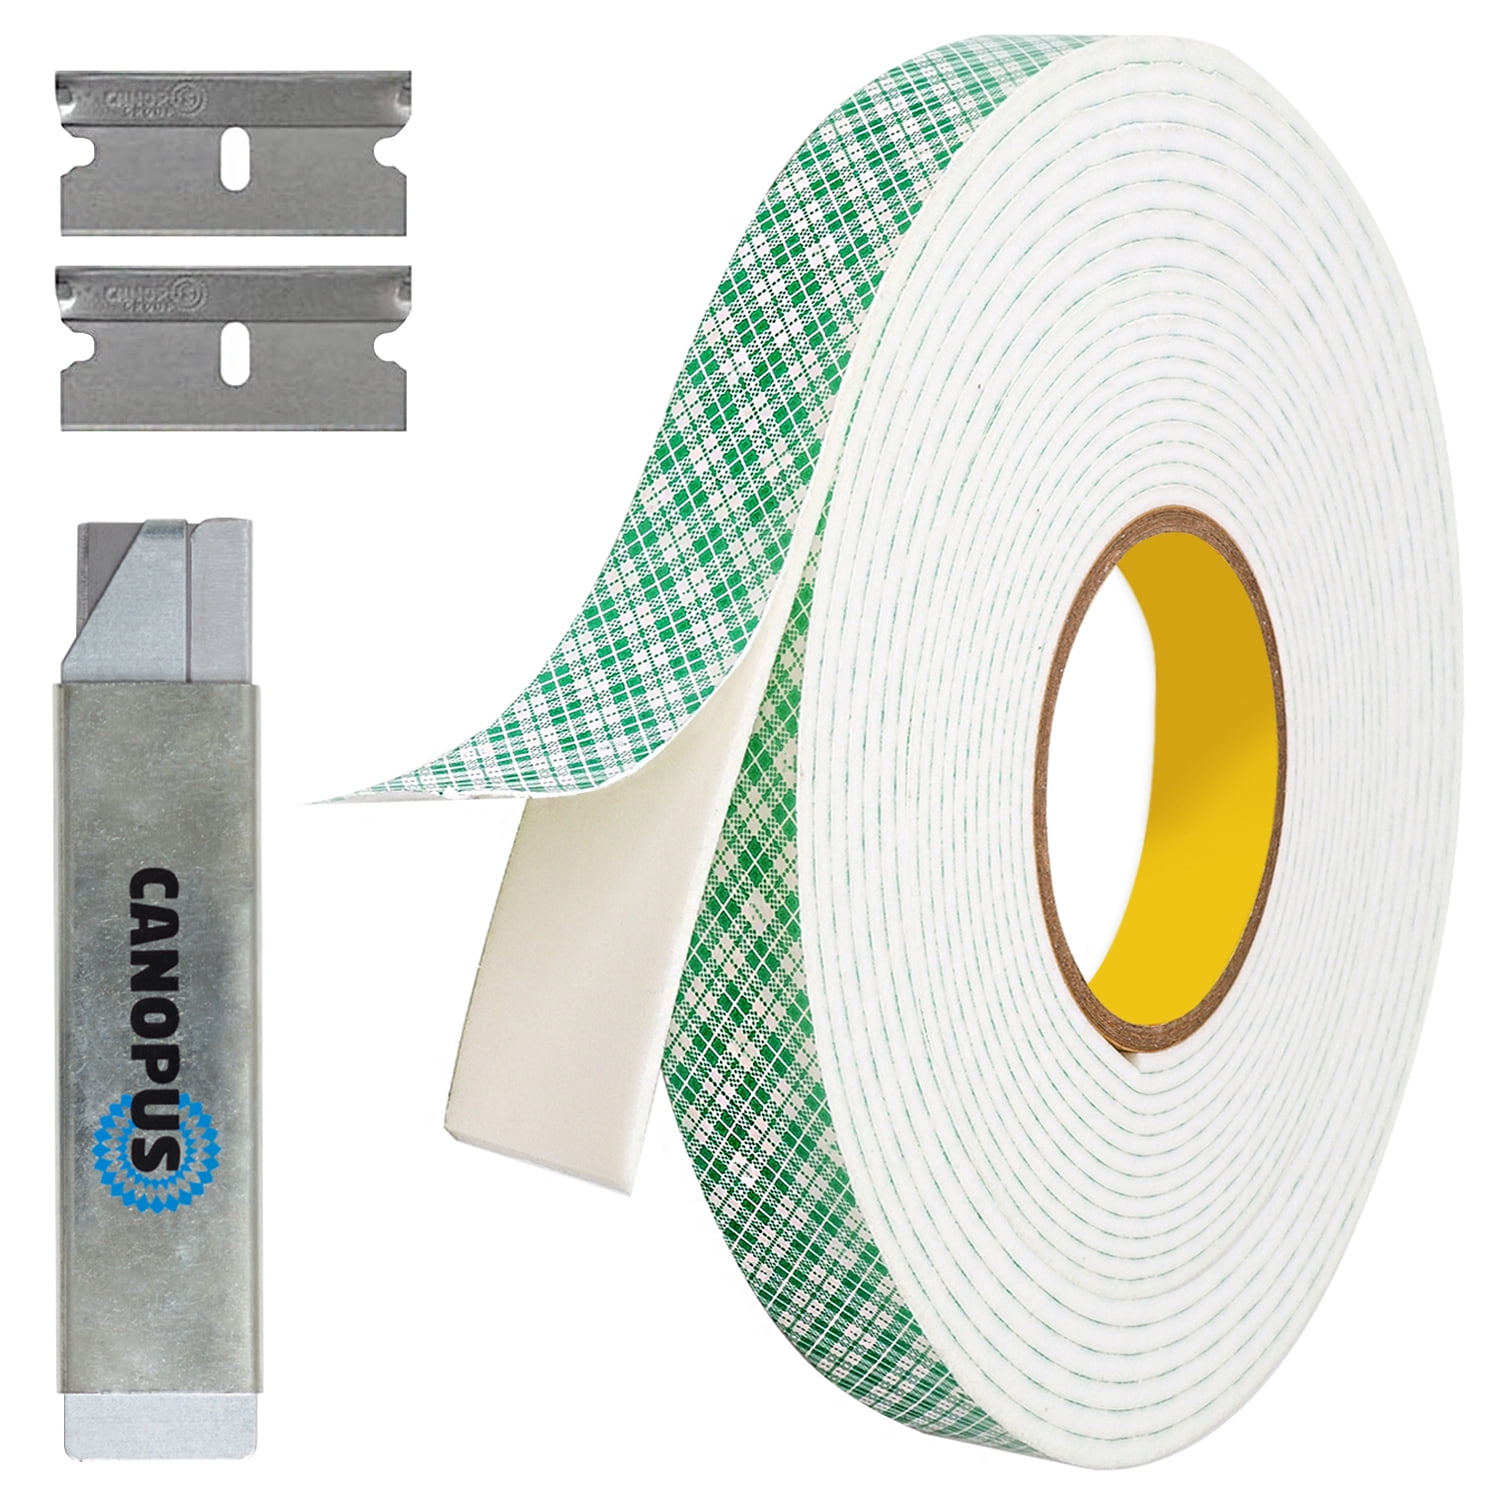 Canopus Double Sided Foam Tape for Craft and Card Making Projects, Heavy  Duty Adhesive Mounting Tape 4016 (0.5in x 10yd)